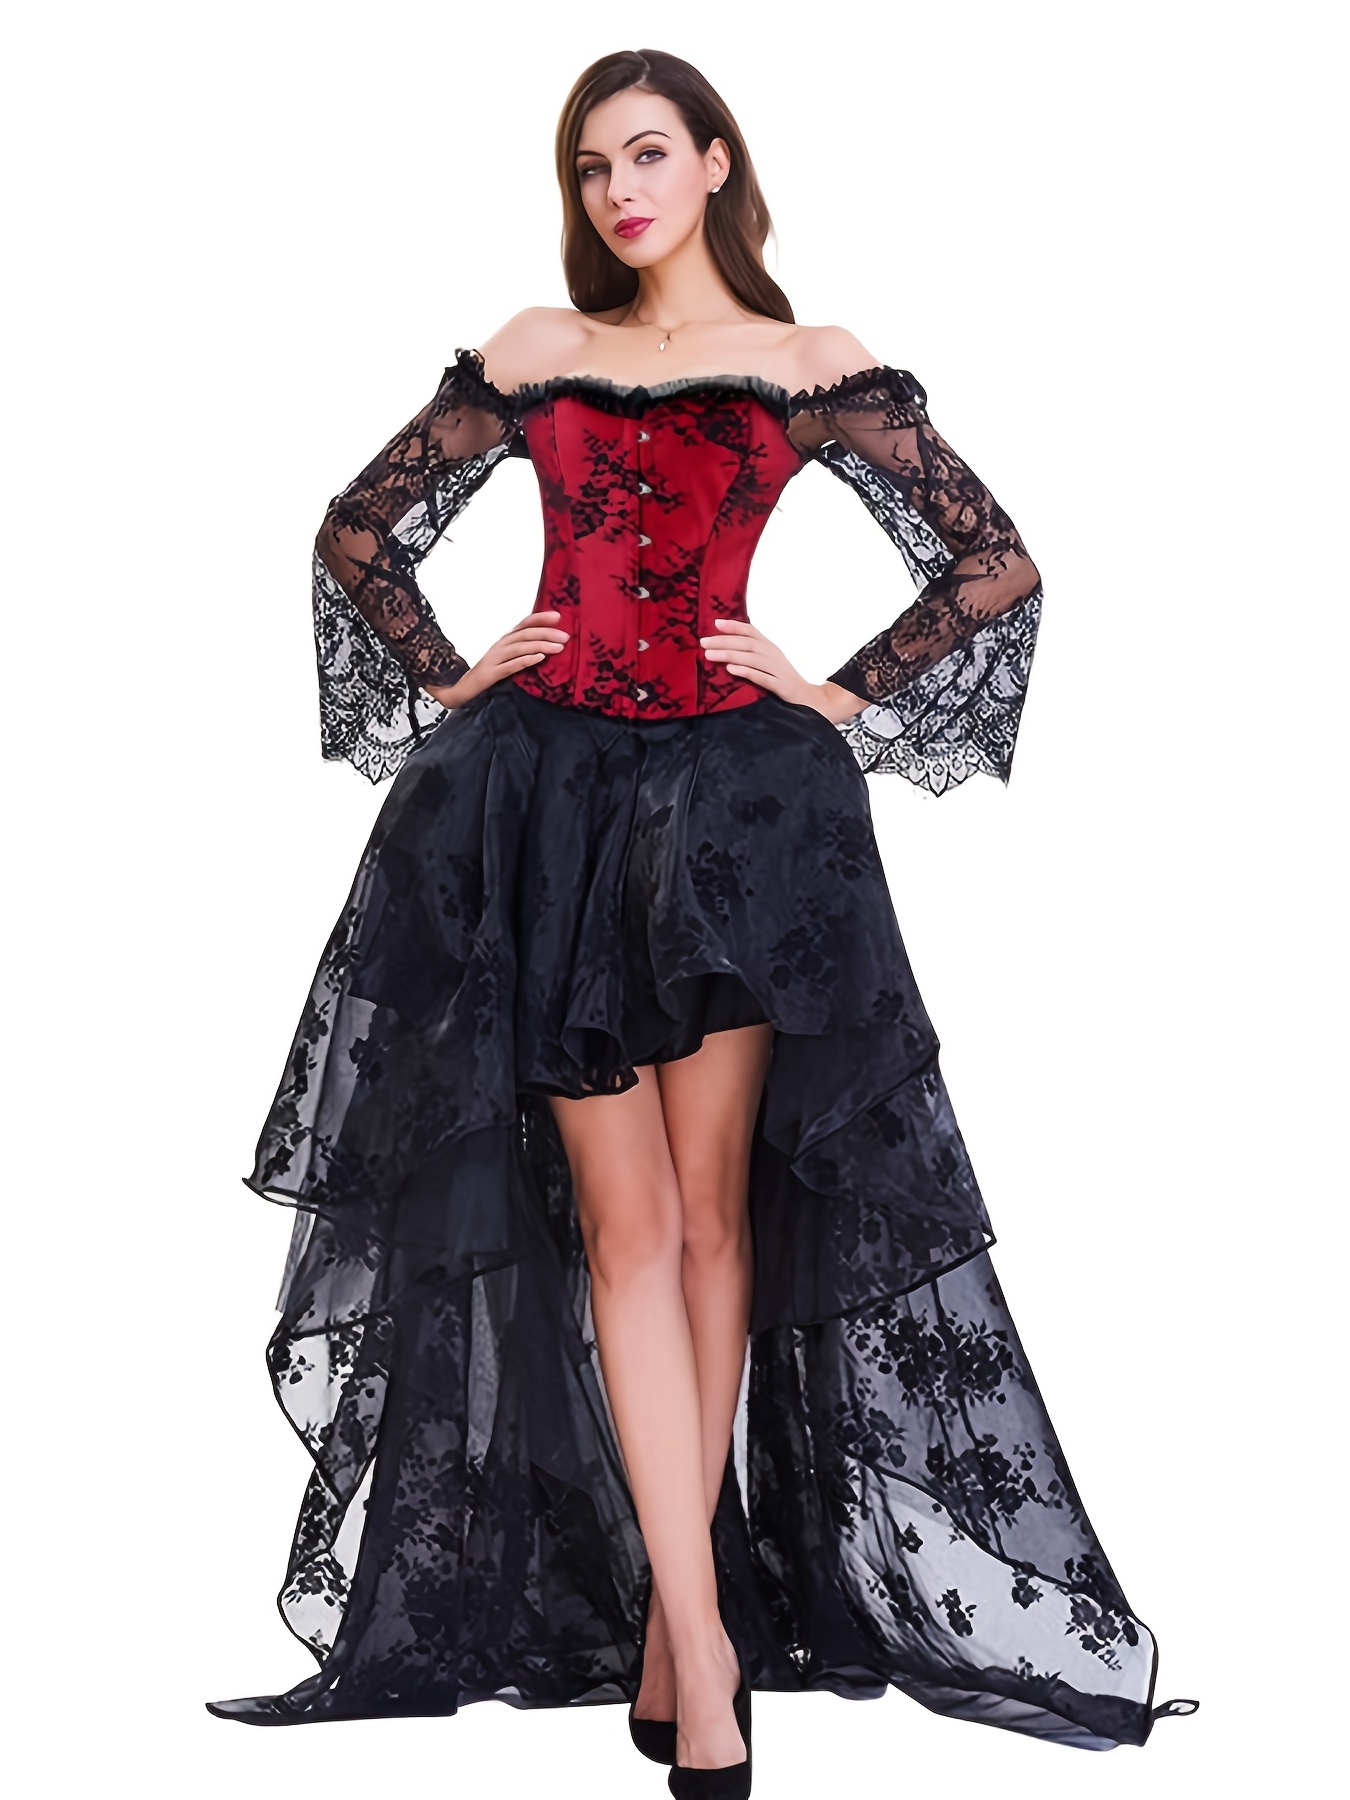 Vintage Lace-Up Corset Top for Women - Elegant Slimming Bustier for  Halloween Costume